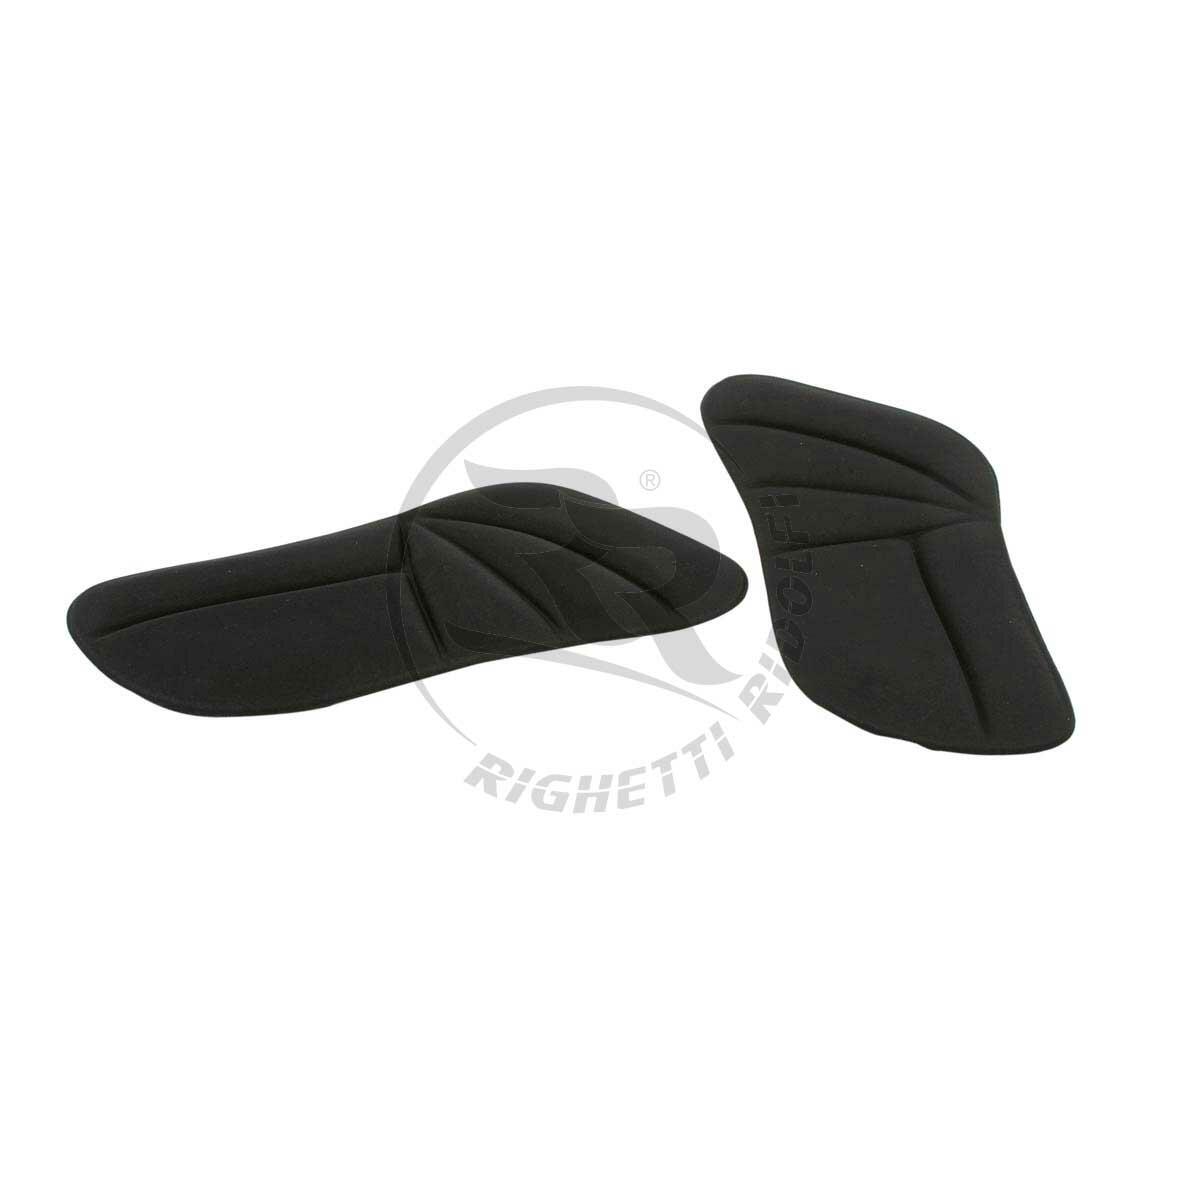 Two Piece Seat Pad - Rear or Side